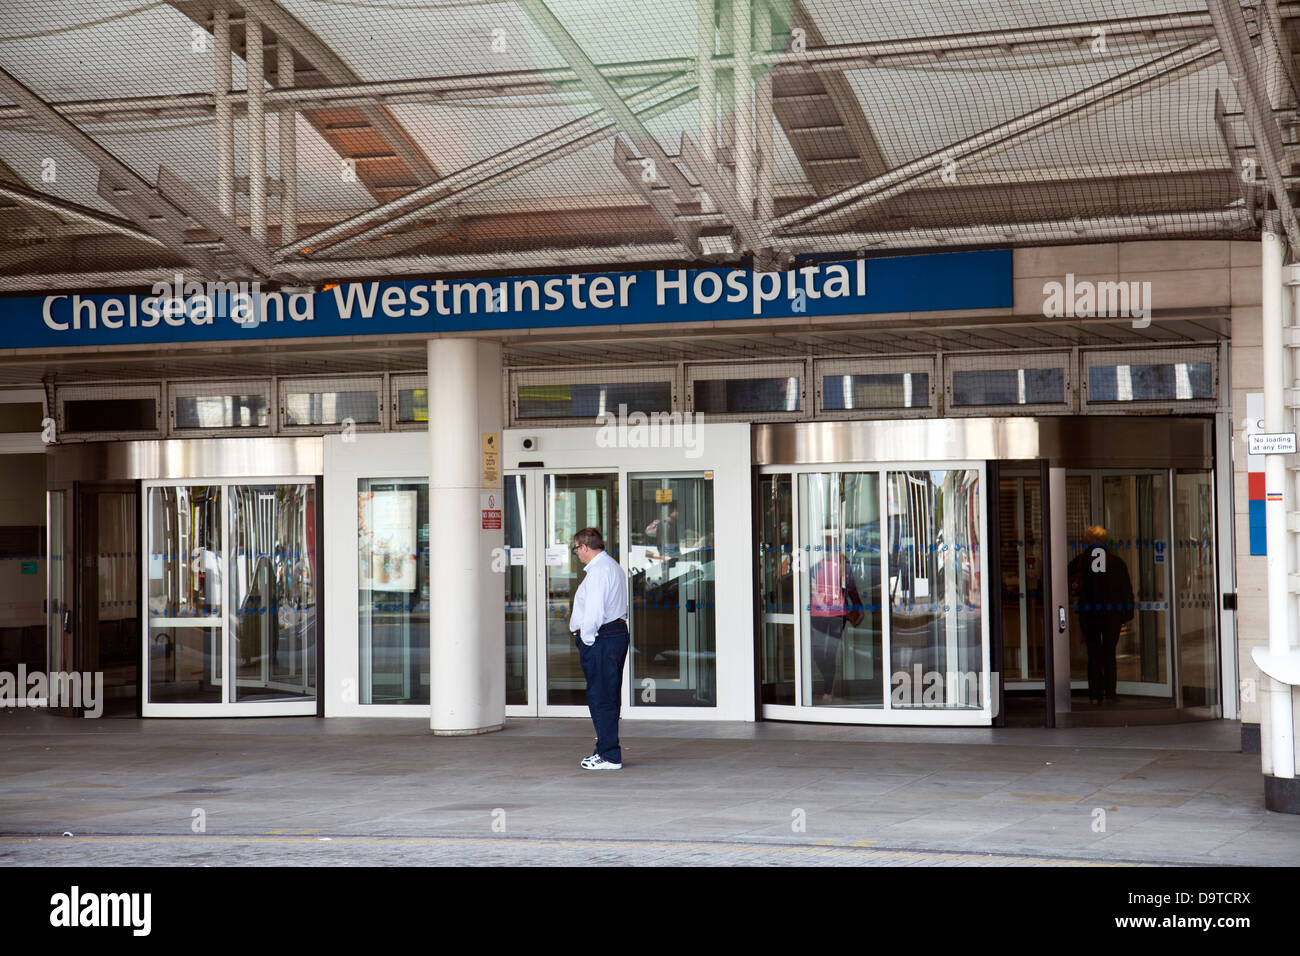 Chelsea and Westminster Hospital on Fulham Rd - London UK Stock Photo